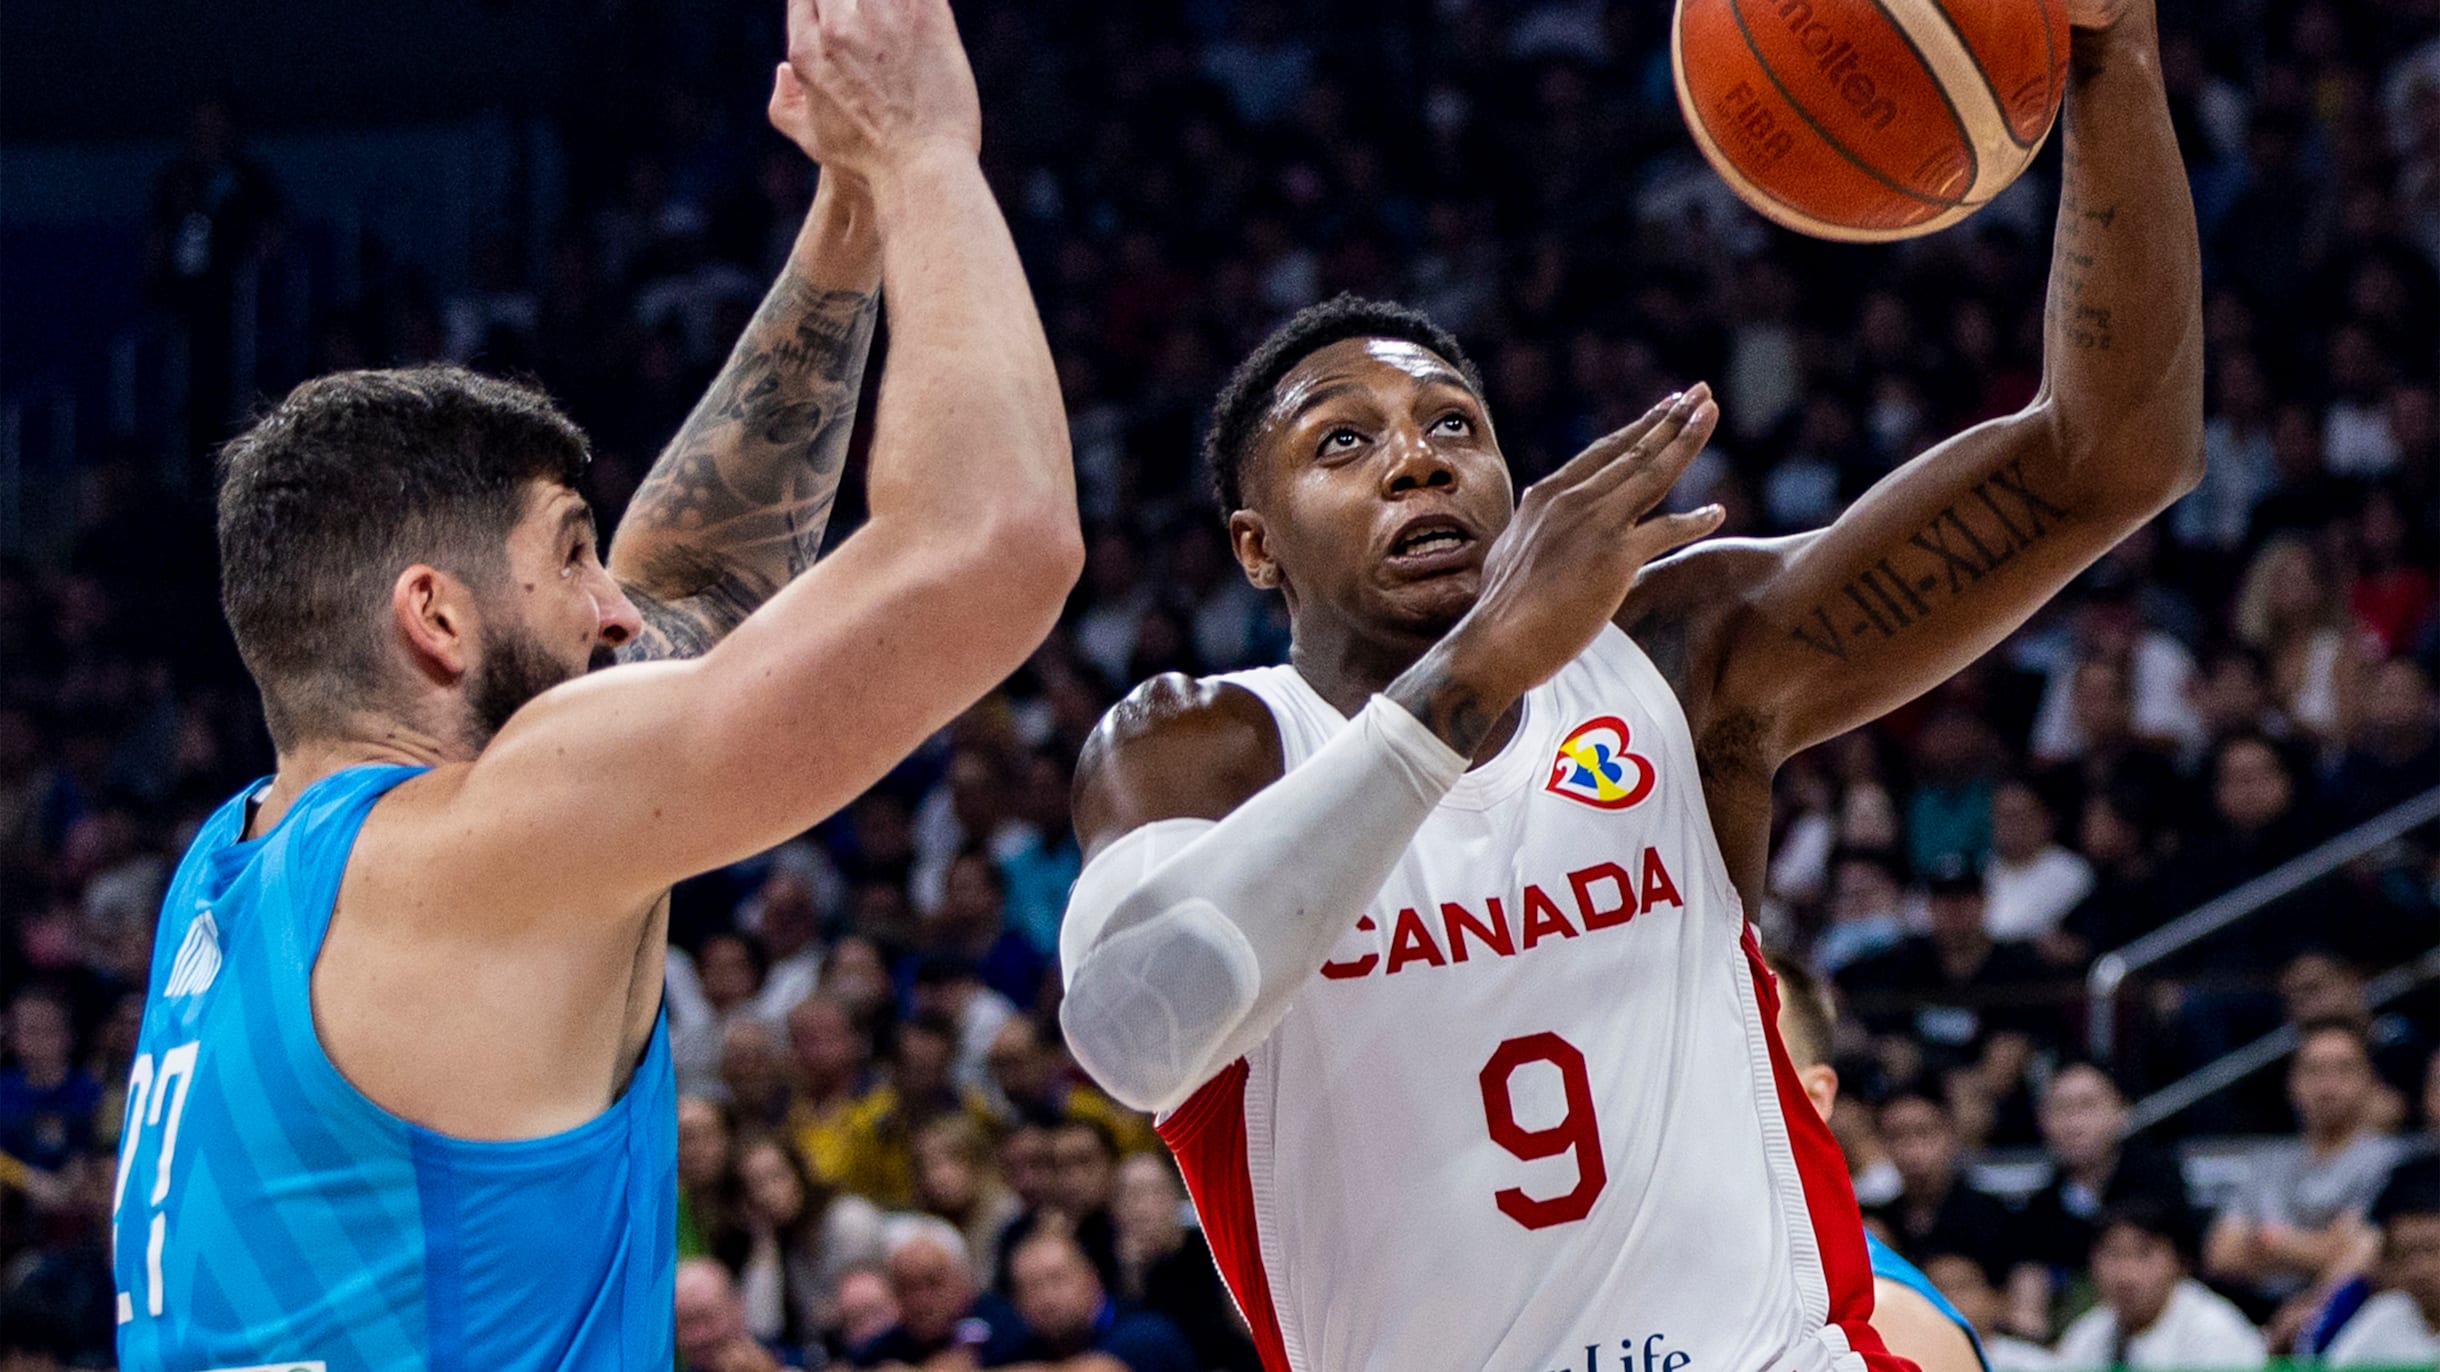 Canada destroys exhausted Germans in its tournament opener